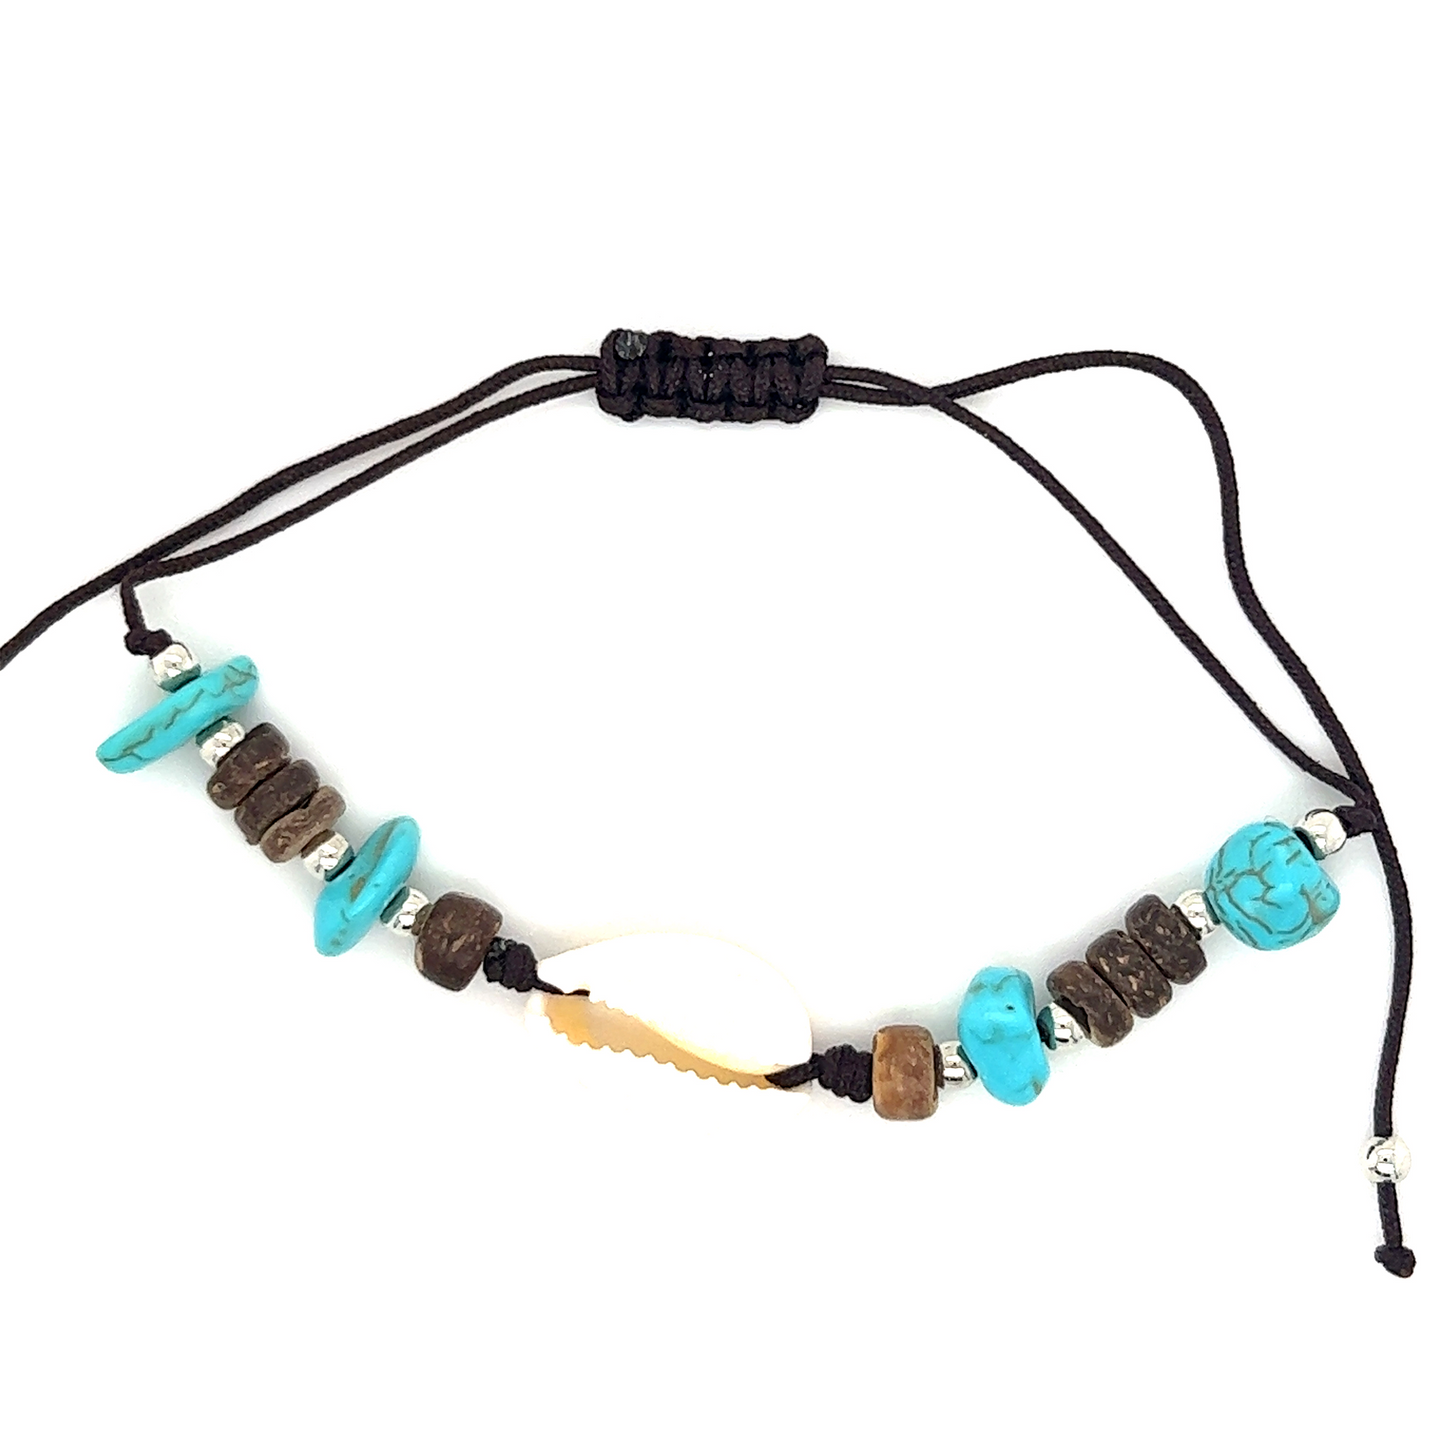 A Super Silver Cowrie Shell Beaded Bracelet adorned with turquoise beads and accentuated with hints of brown and black beads.